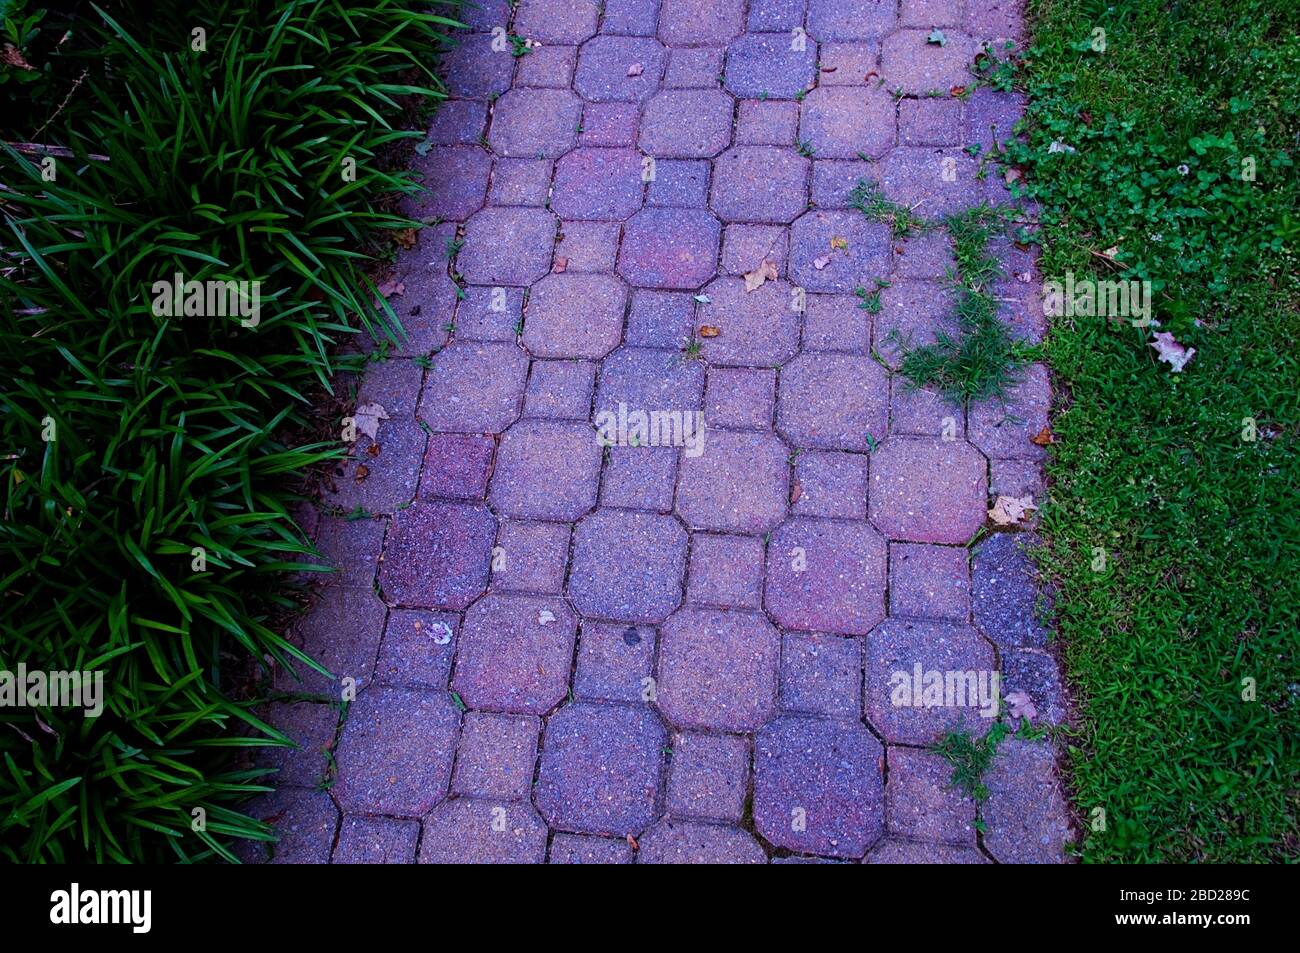 Brick walkway outside with a colorful look Stock Photo